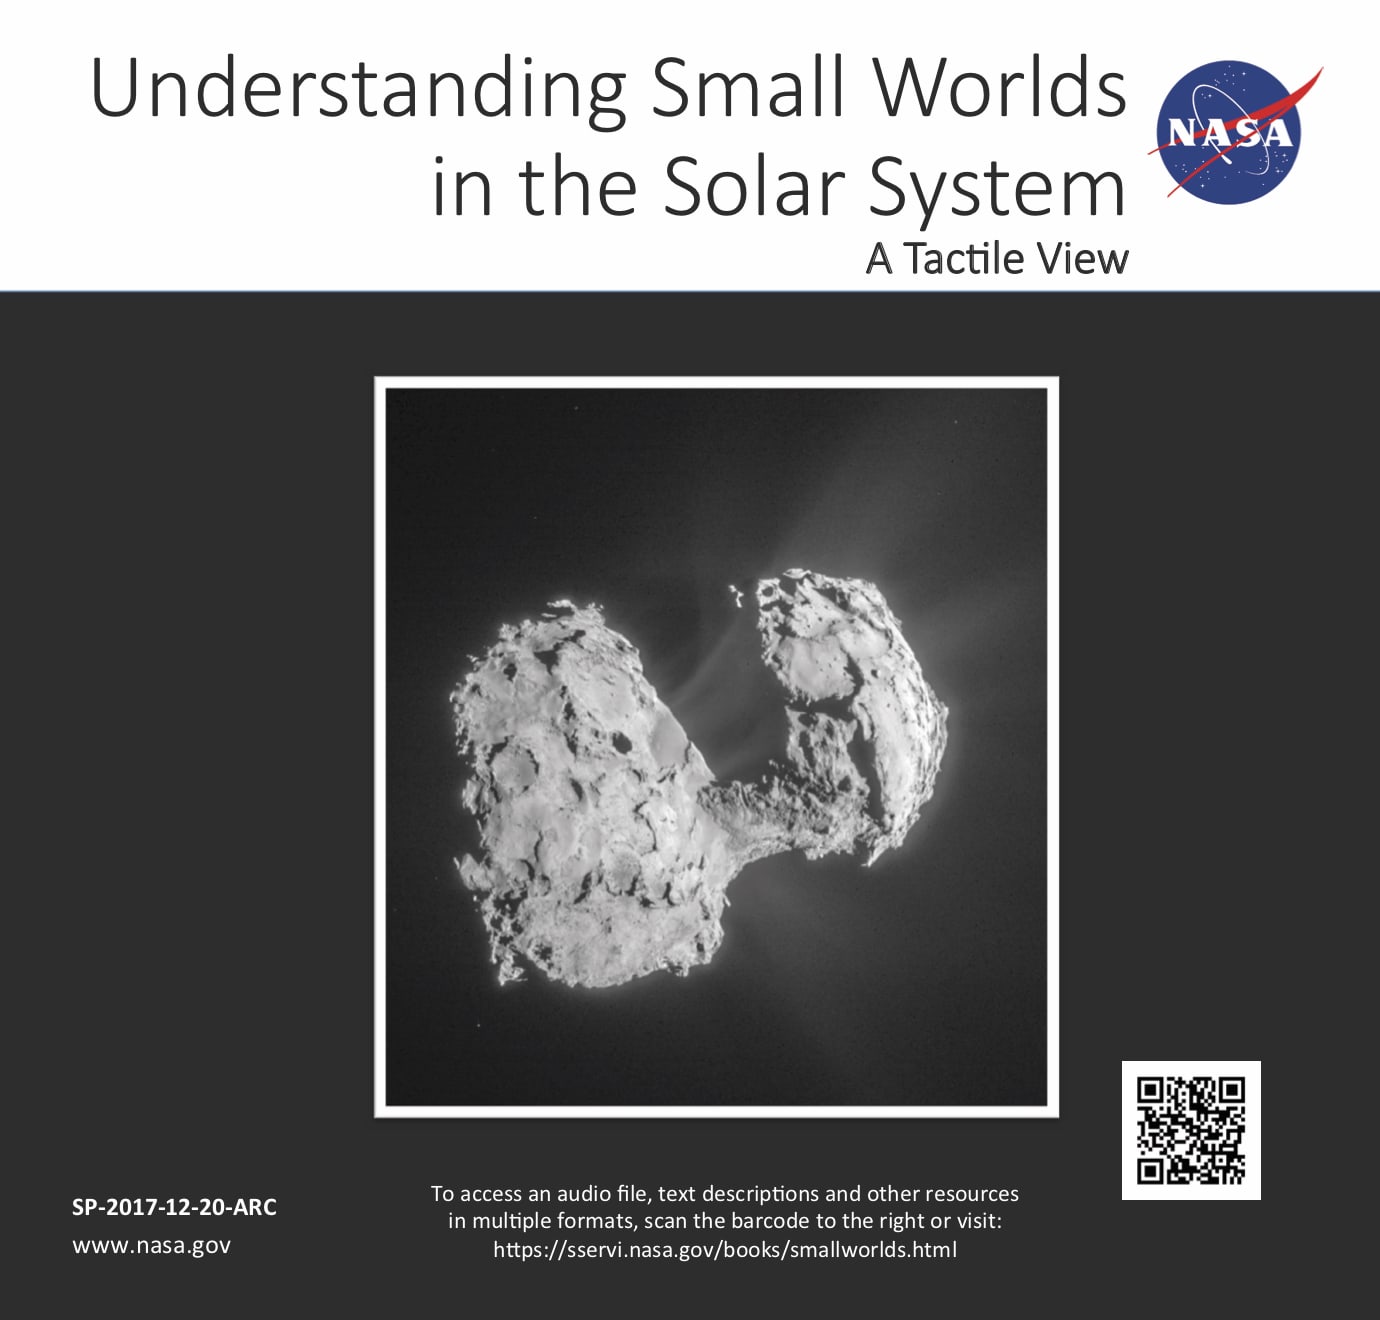 The cover image of Understanding Small Worlds in the Solar System